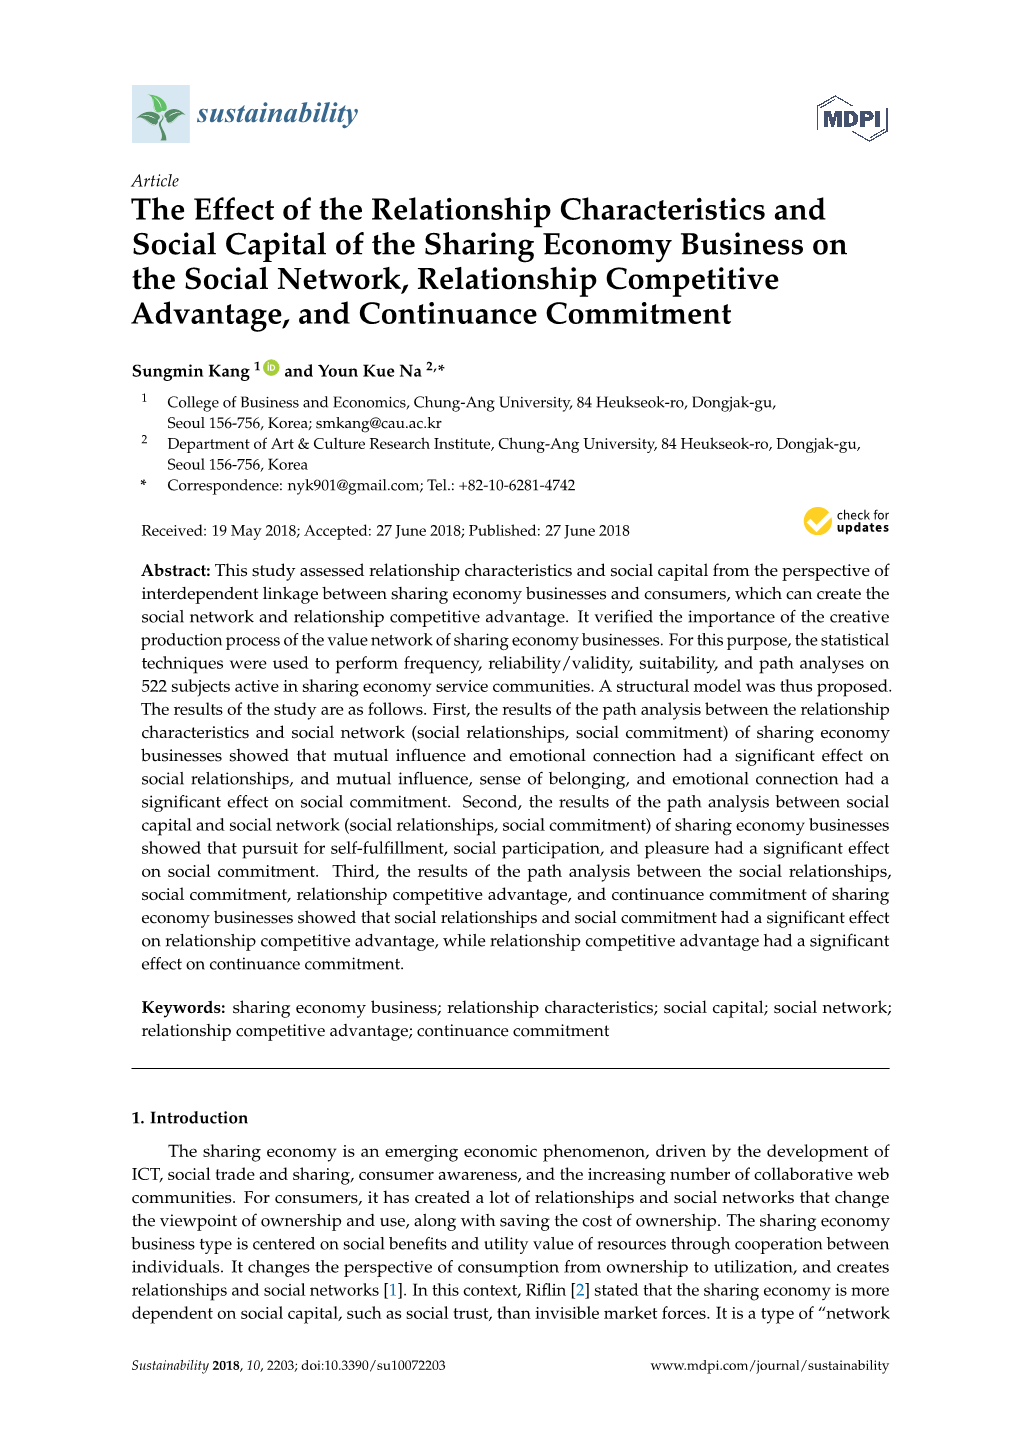 The Effect of the Relationship Characteristics and Social Capital of the Sharing Economy Business on the Social Network, Relatio